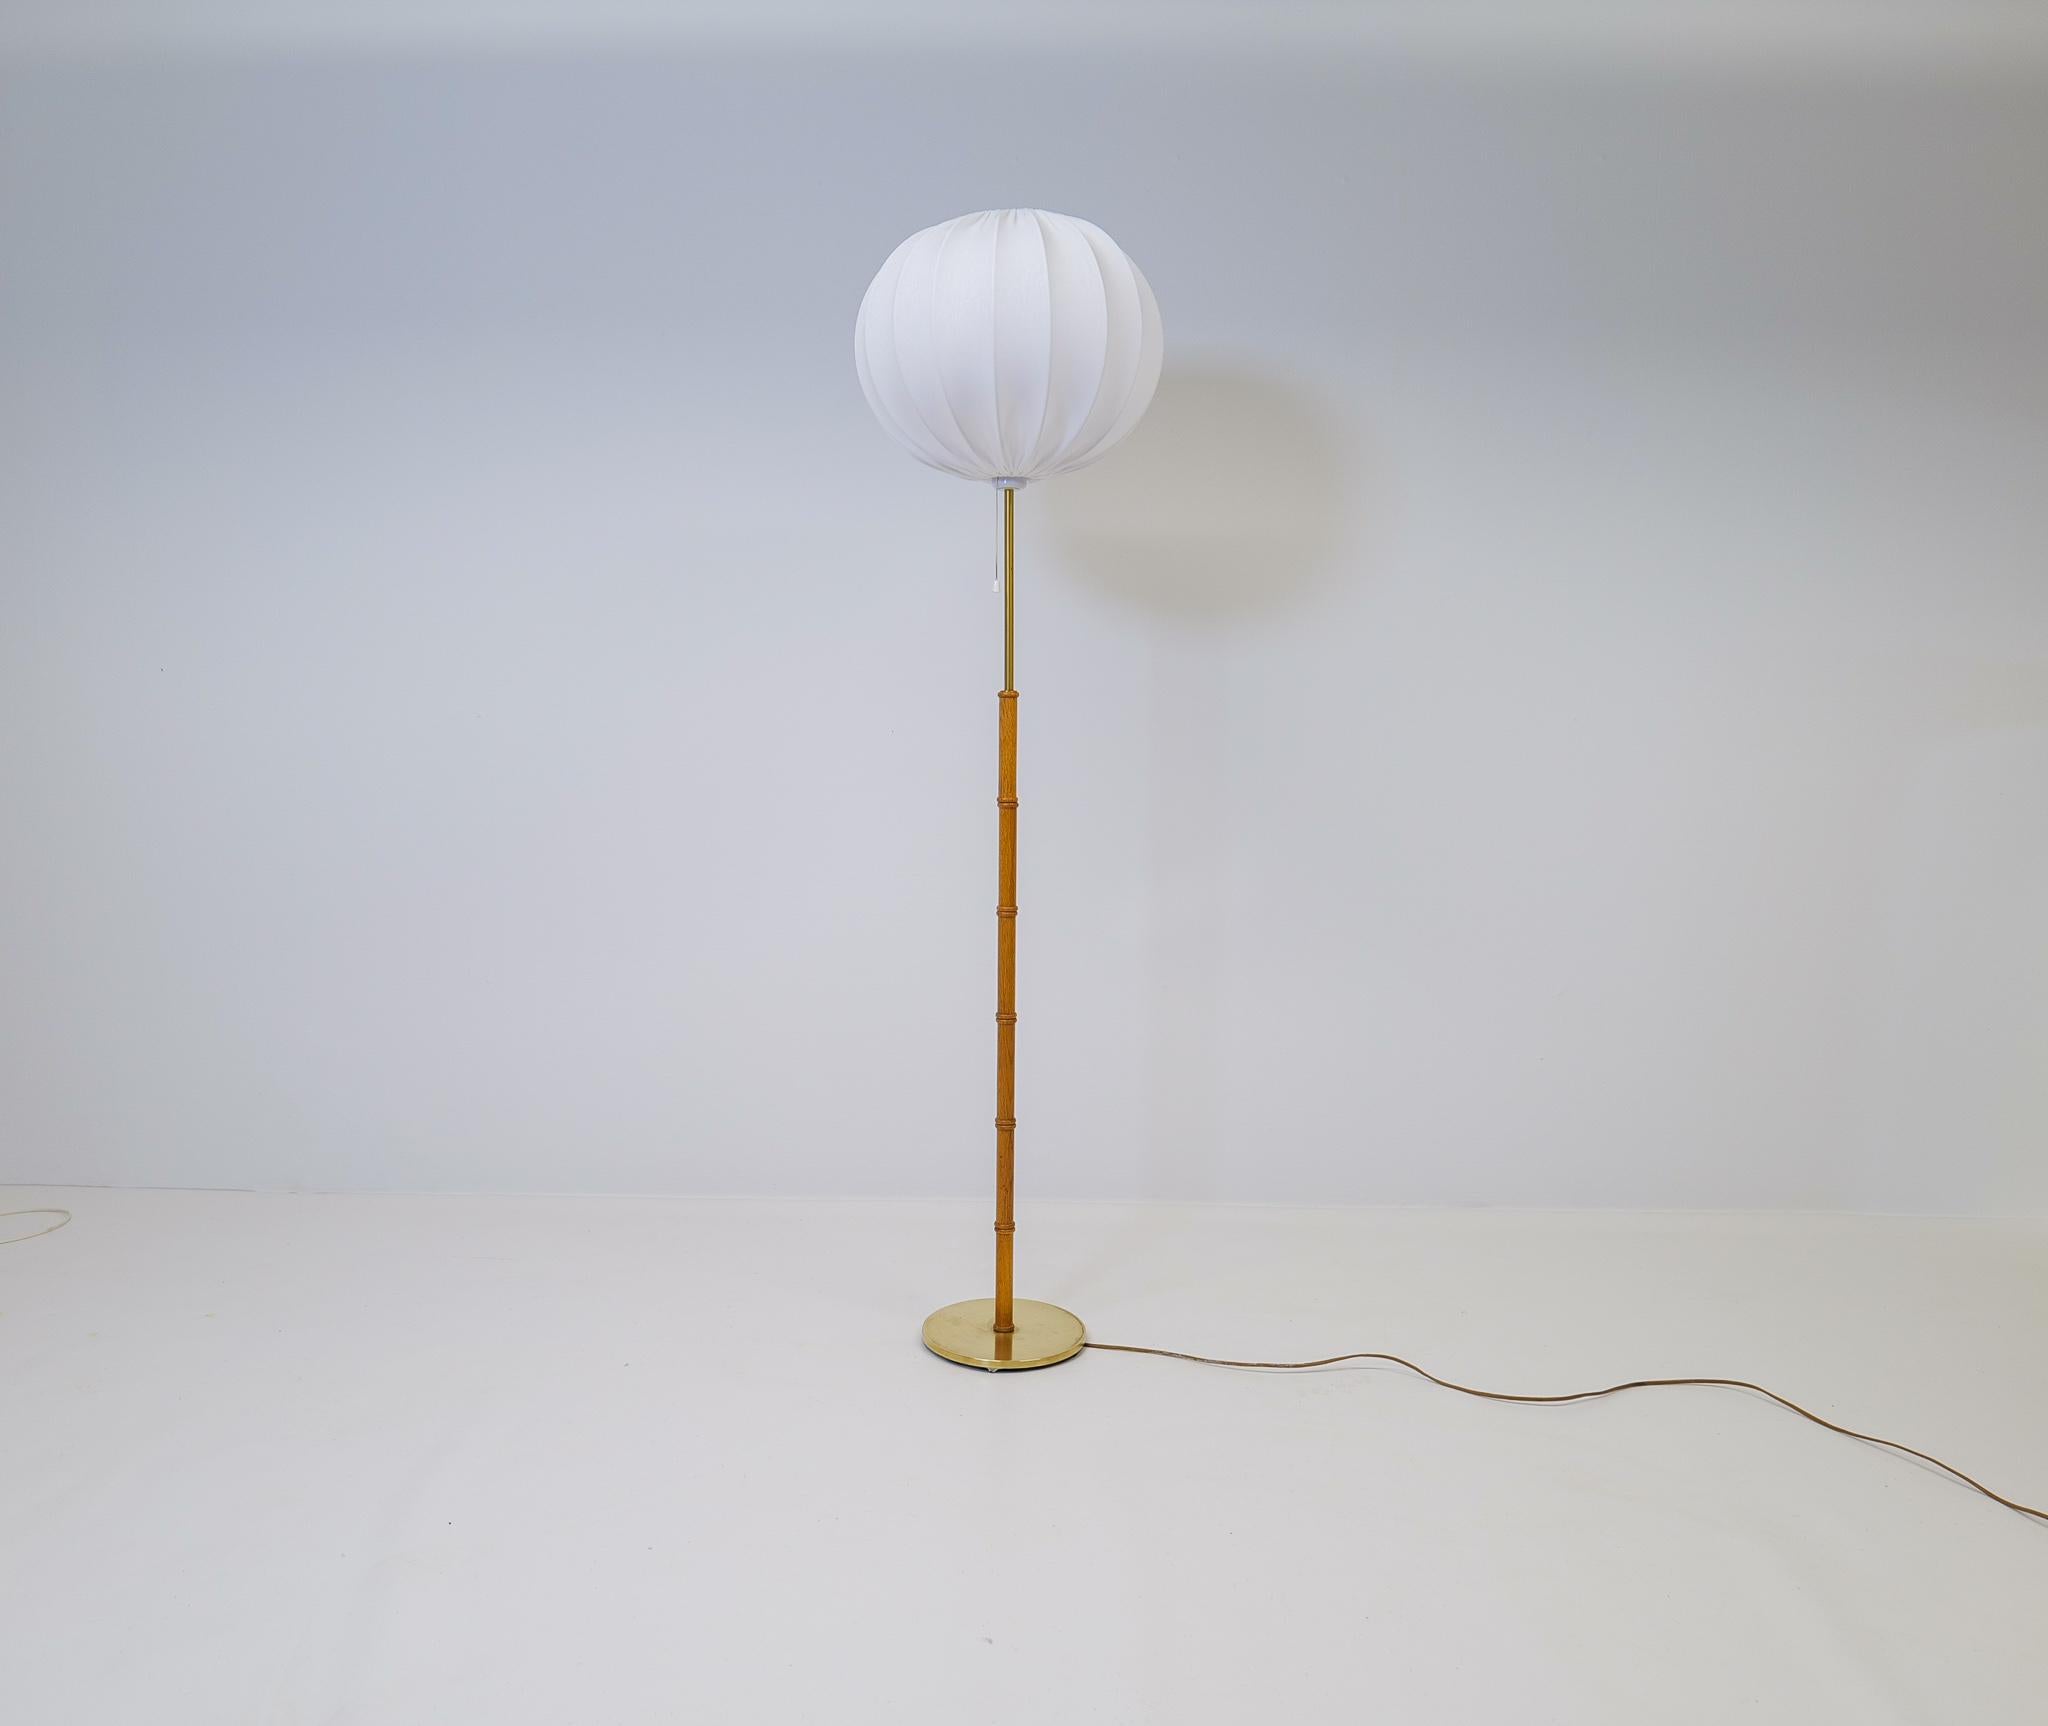 This lamp was made in Sweden at Falkenbergs Belysning. The combining of brass and oak makes this lamp a good piece of Swedish design. New quality round shade made in Sweden.

Good working condition with some dents on the foot and scratches on the